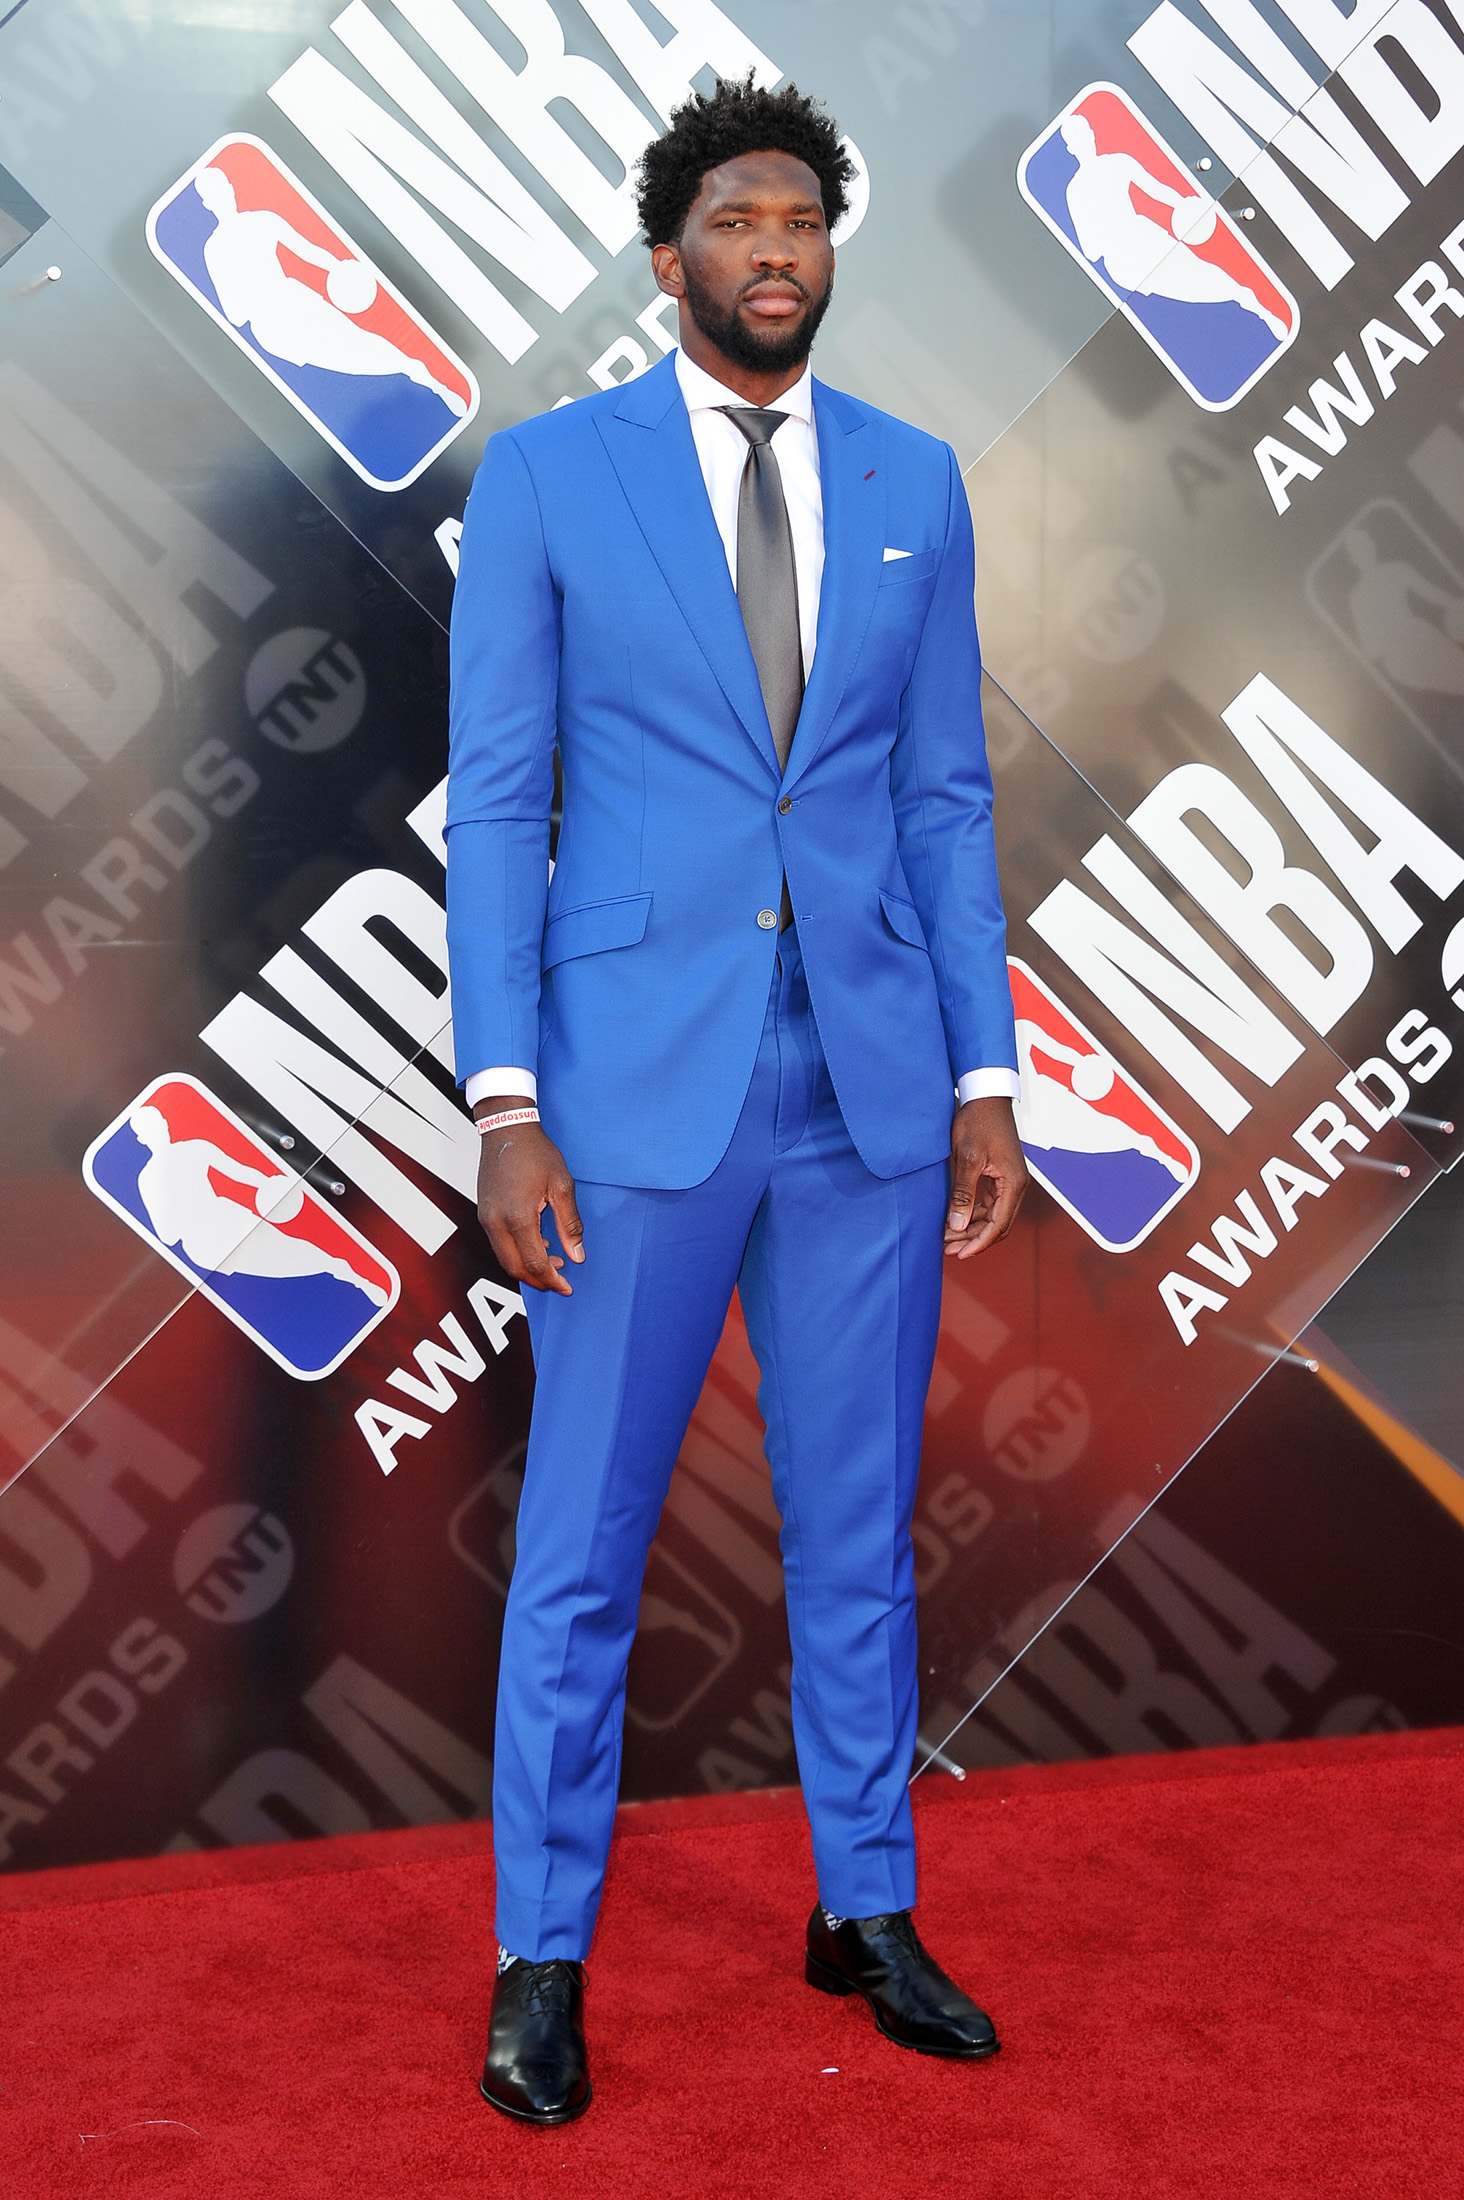 Nice Threads: The Five Best-Dressed Players in the NBA - Fastbreak